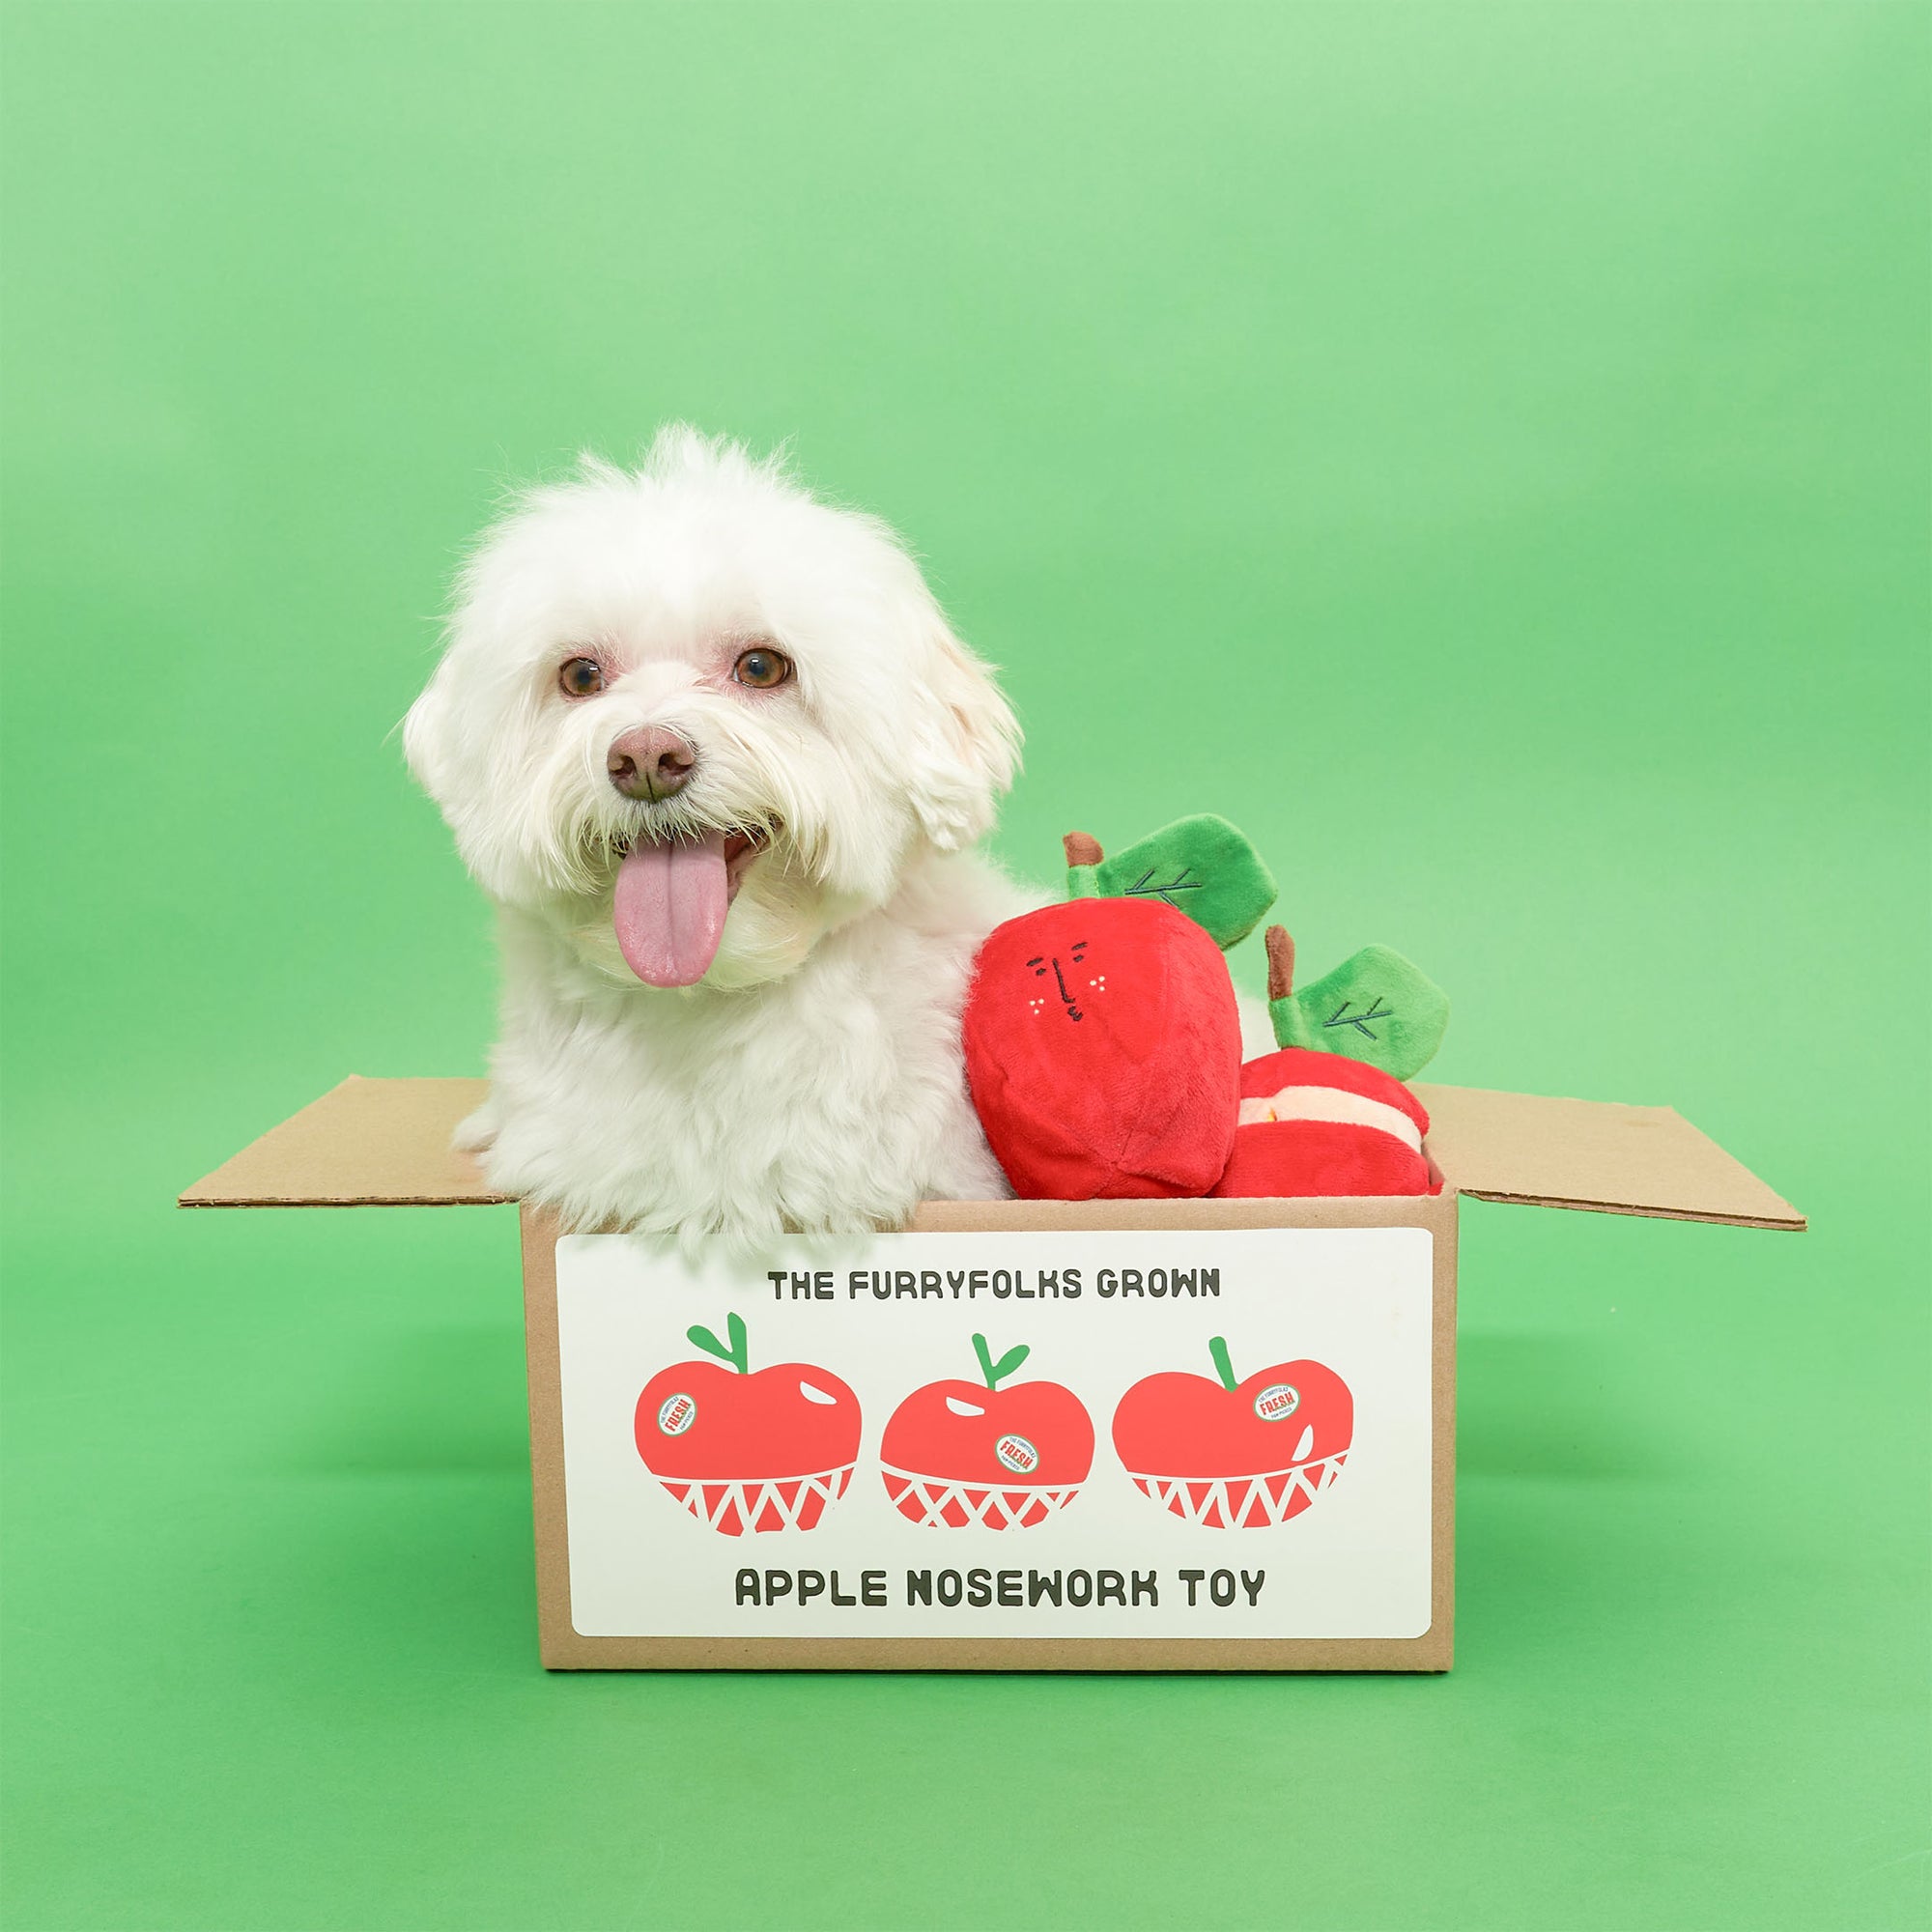  A smiling white dog peeking out of a cardboard box on a green background with red apple-shaped dog toys, labeled "The Furryfolks Grown Apple Nosework Toy".